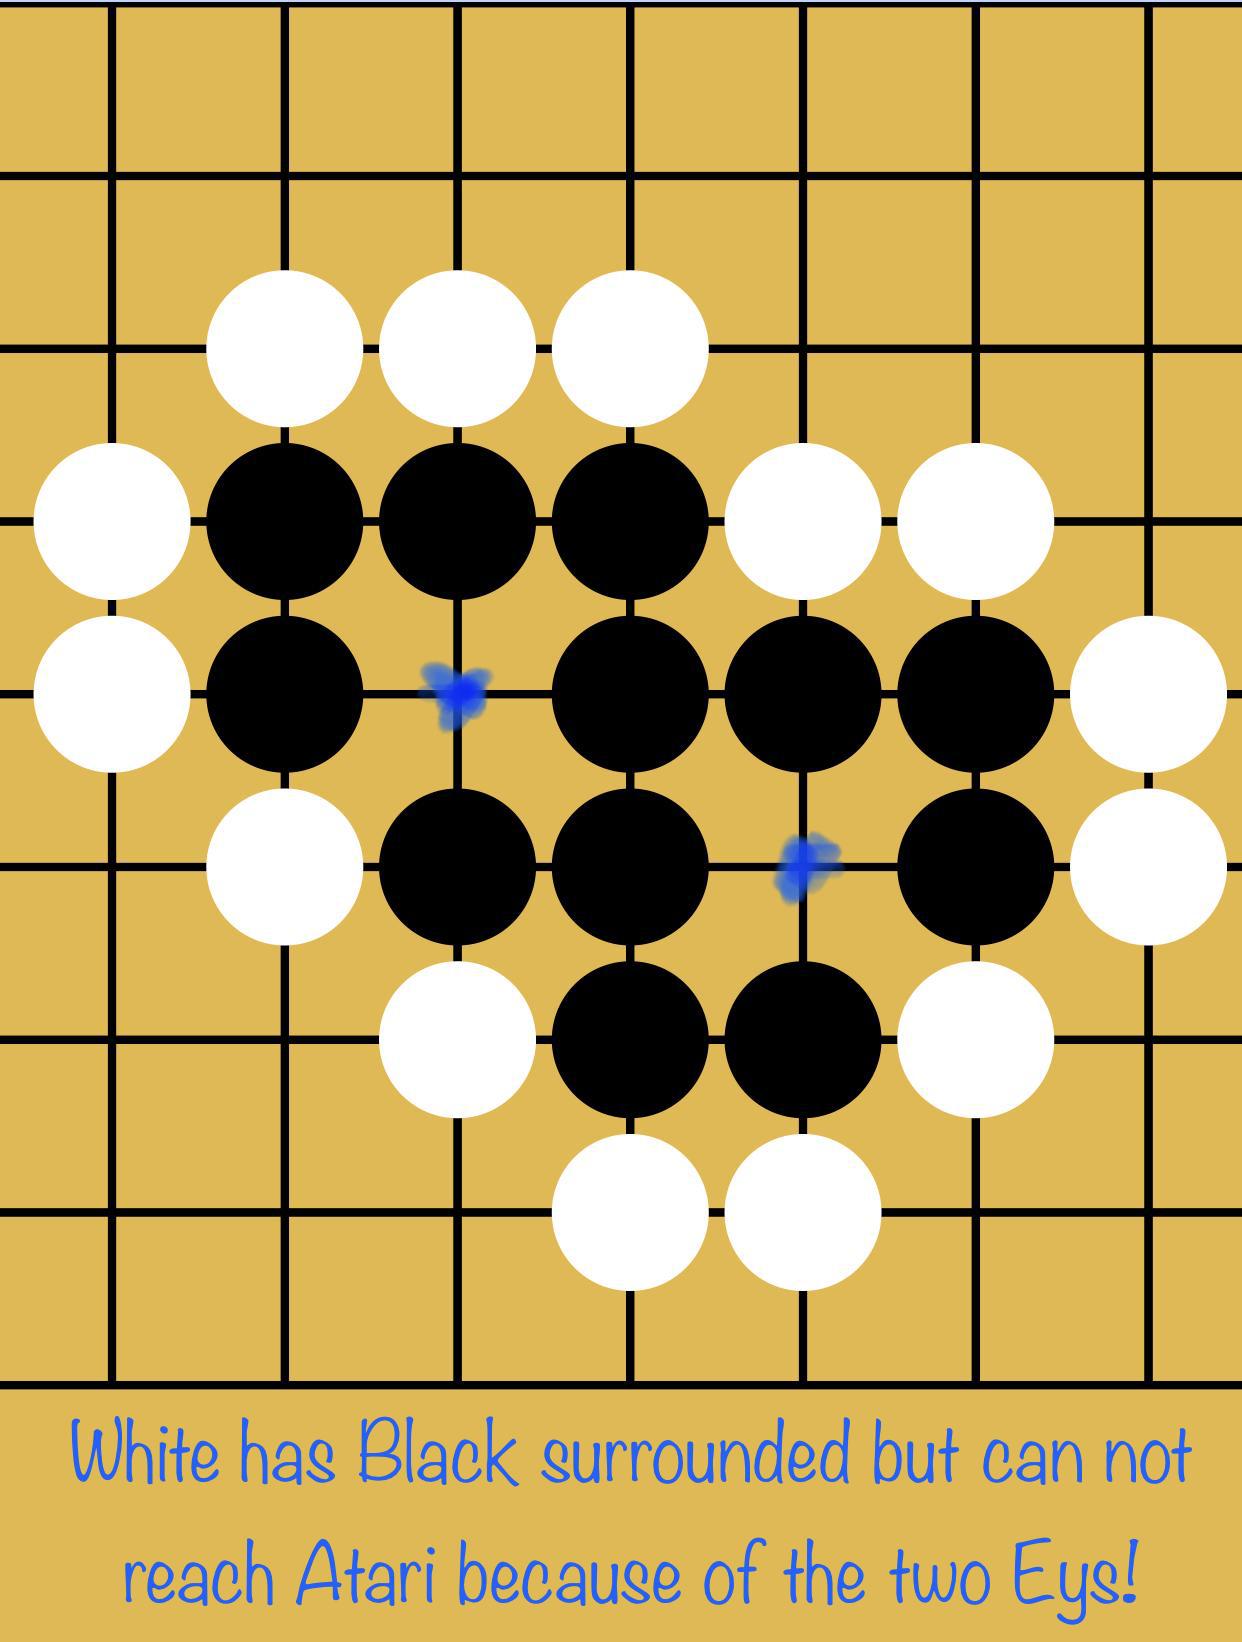 How eyes work in the game of go.